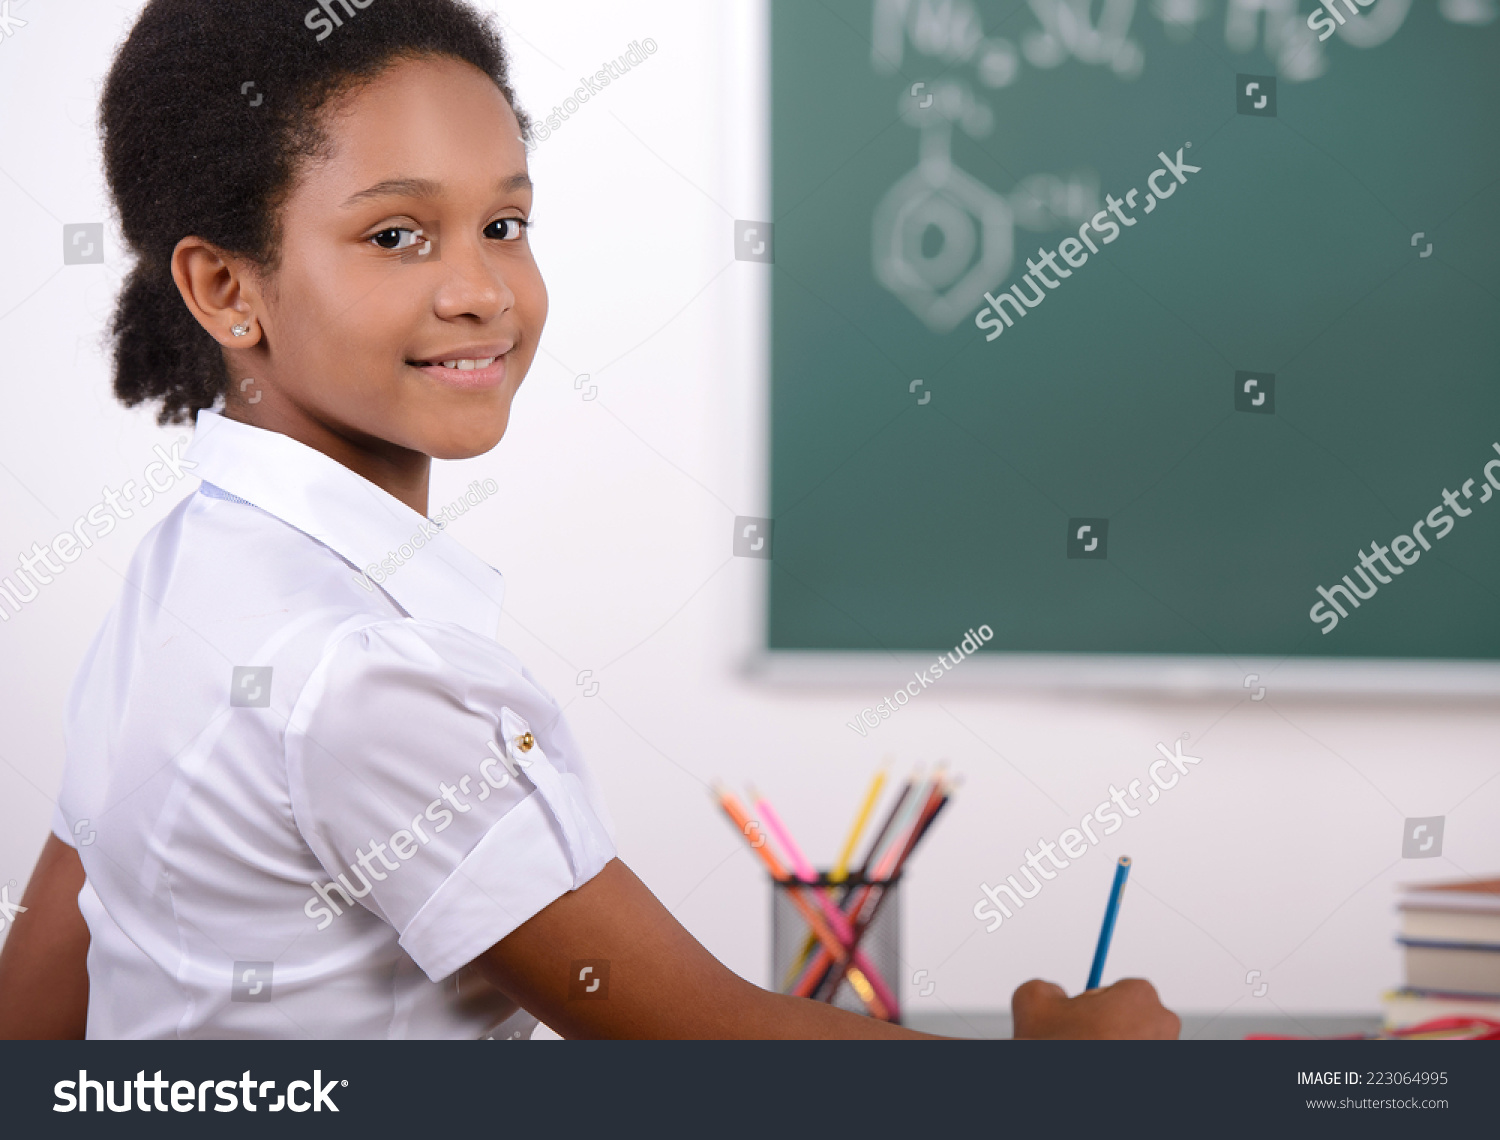 african-american-student-doing-math-problems-on-the-chalkboard-stock-photo-223064995-shutterstock